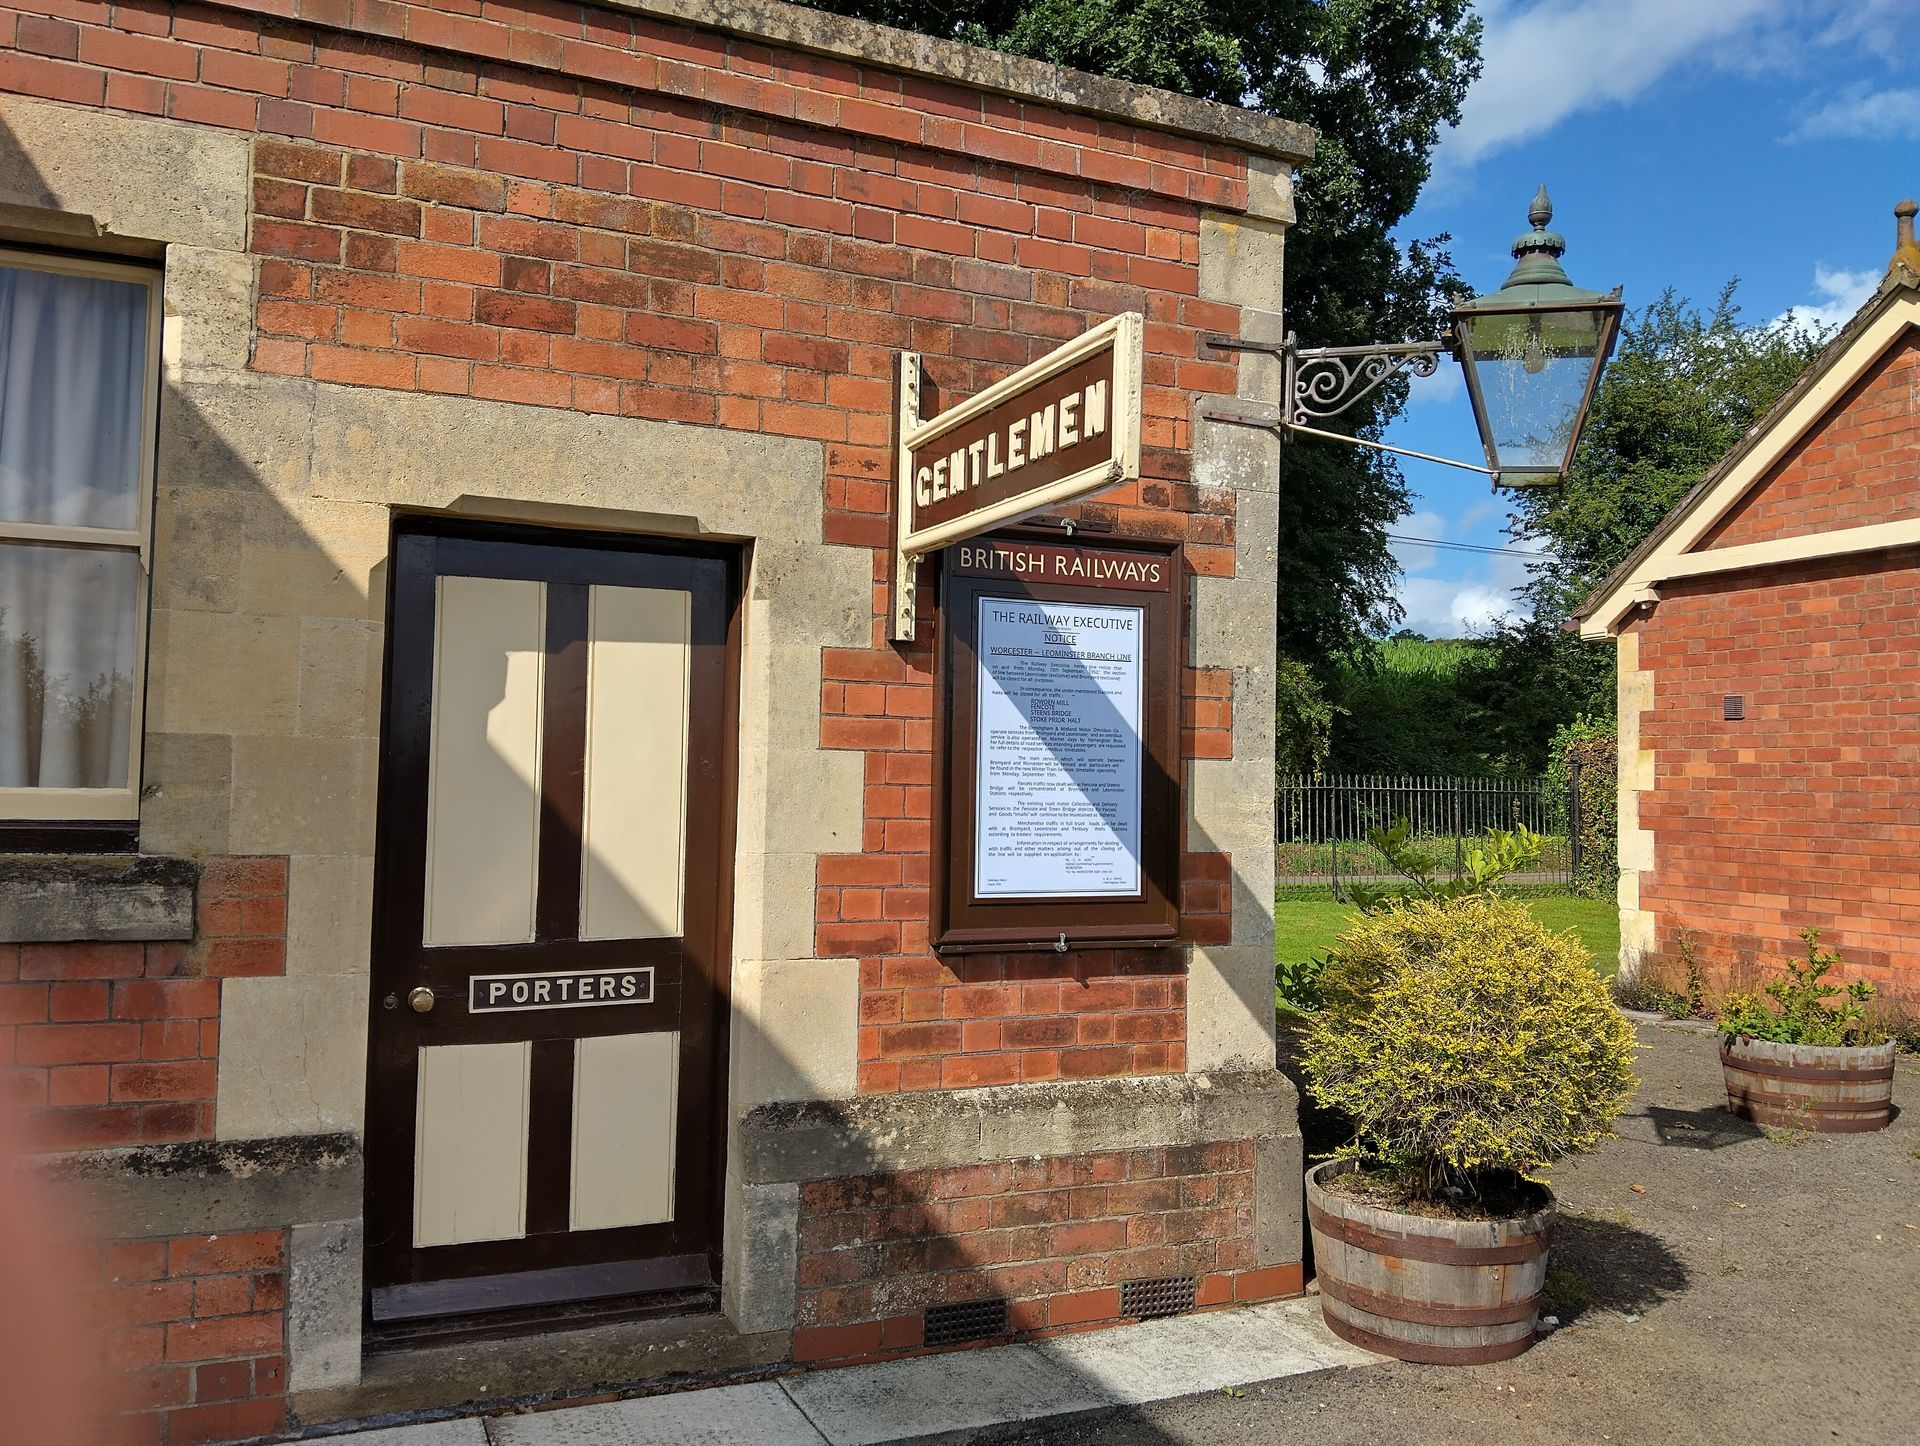 The railway closure sign poster is shown clearly here on the corner of the building by the platform door of the Porters Room